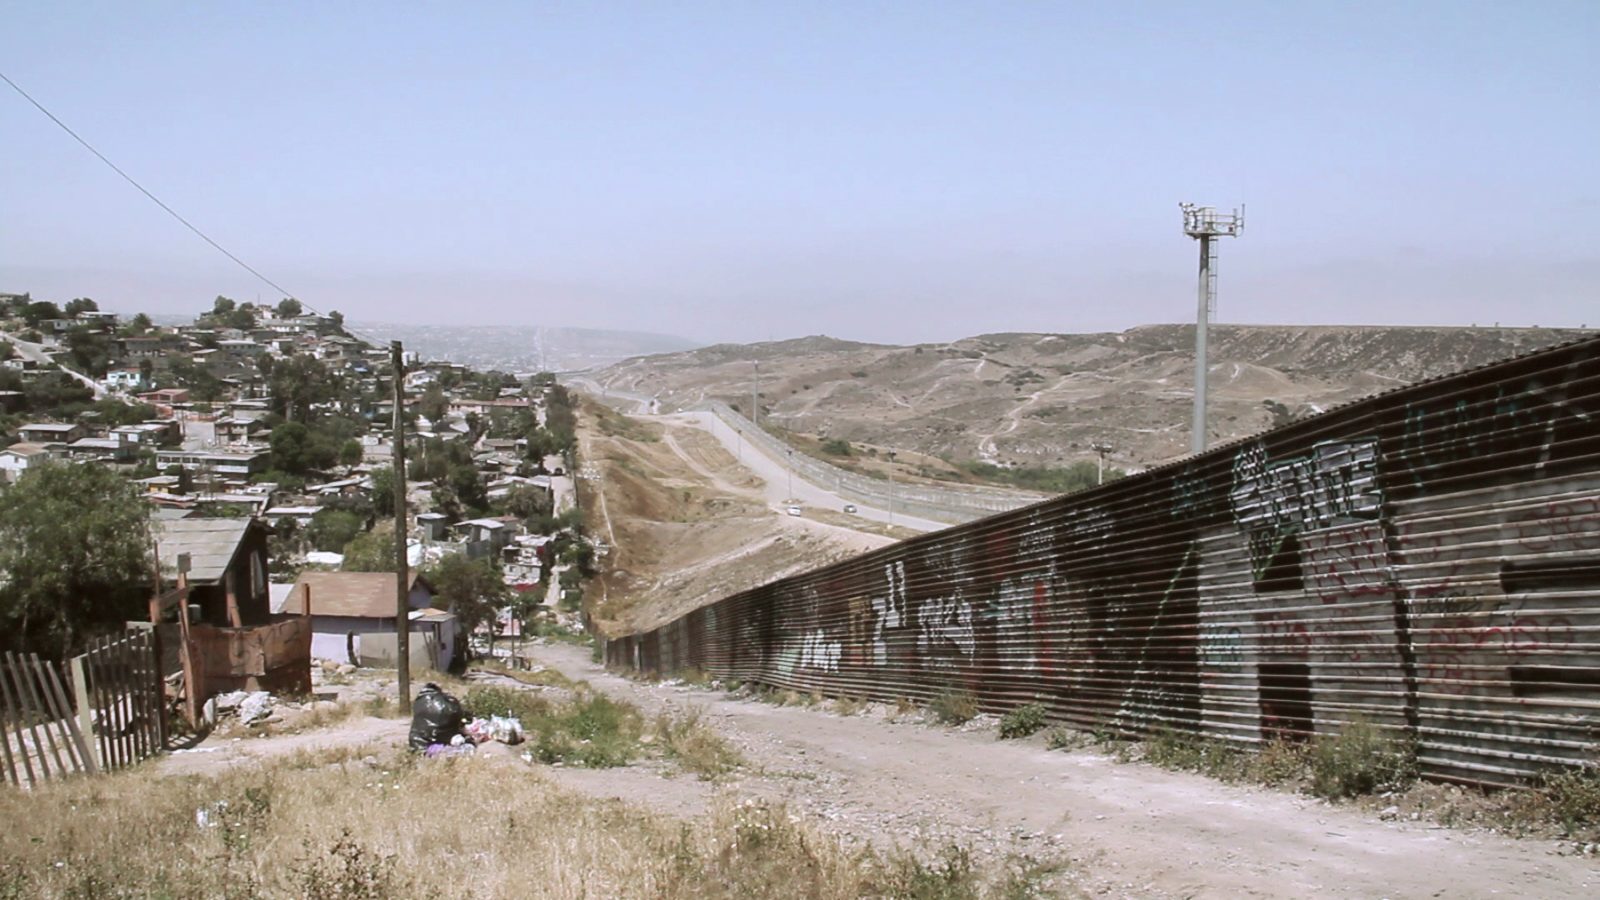 Still from a video essay about the U.S.-Mexico border and its fences.